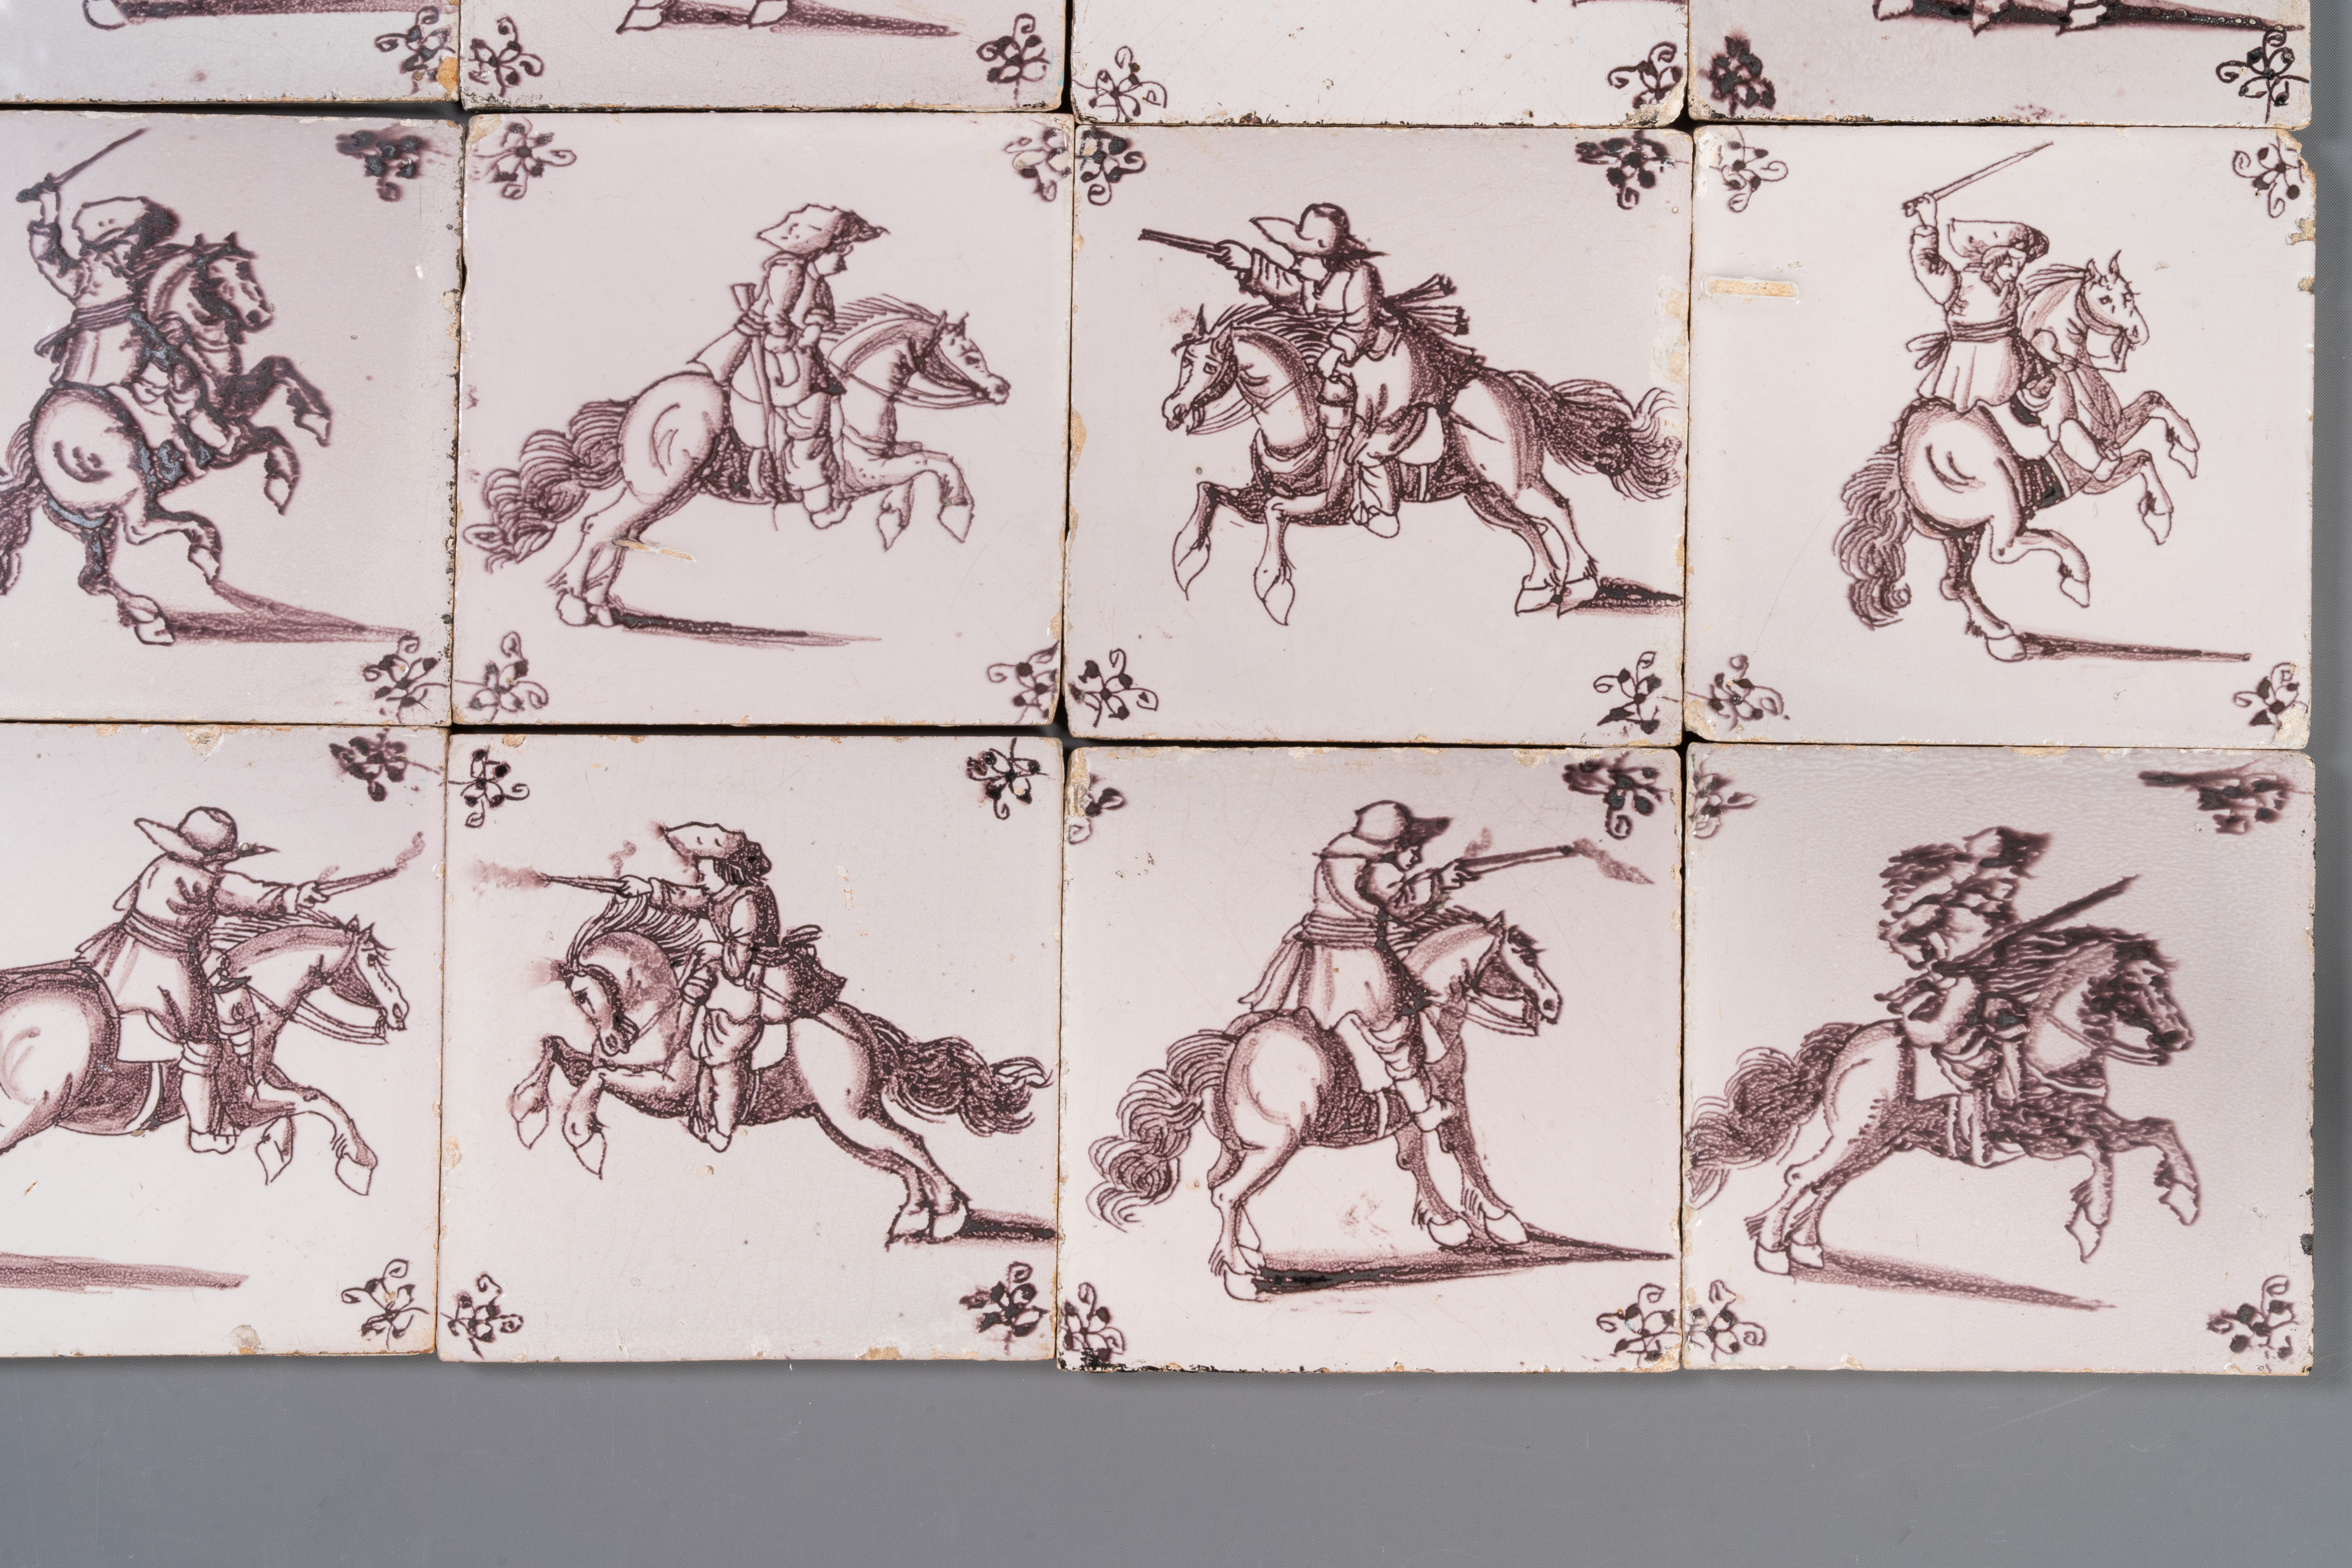 Fifteen Dutch Delft manganese tiles with horse riders, late 17th C. - Image 8 of 13